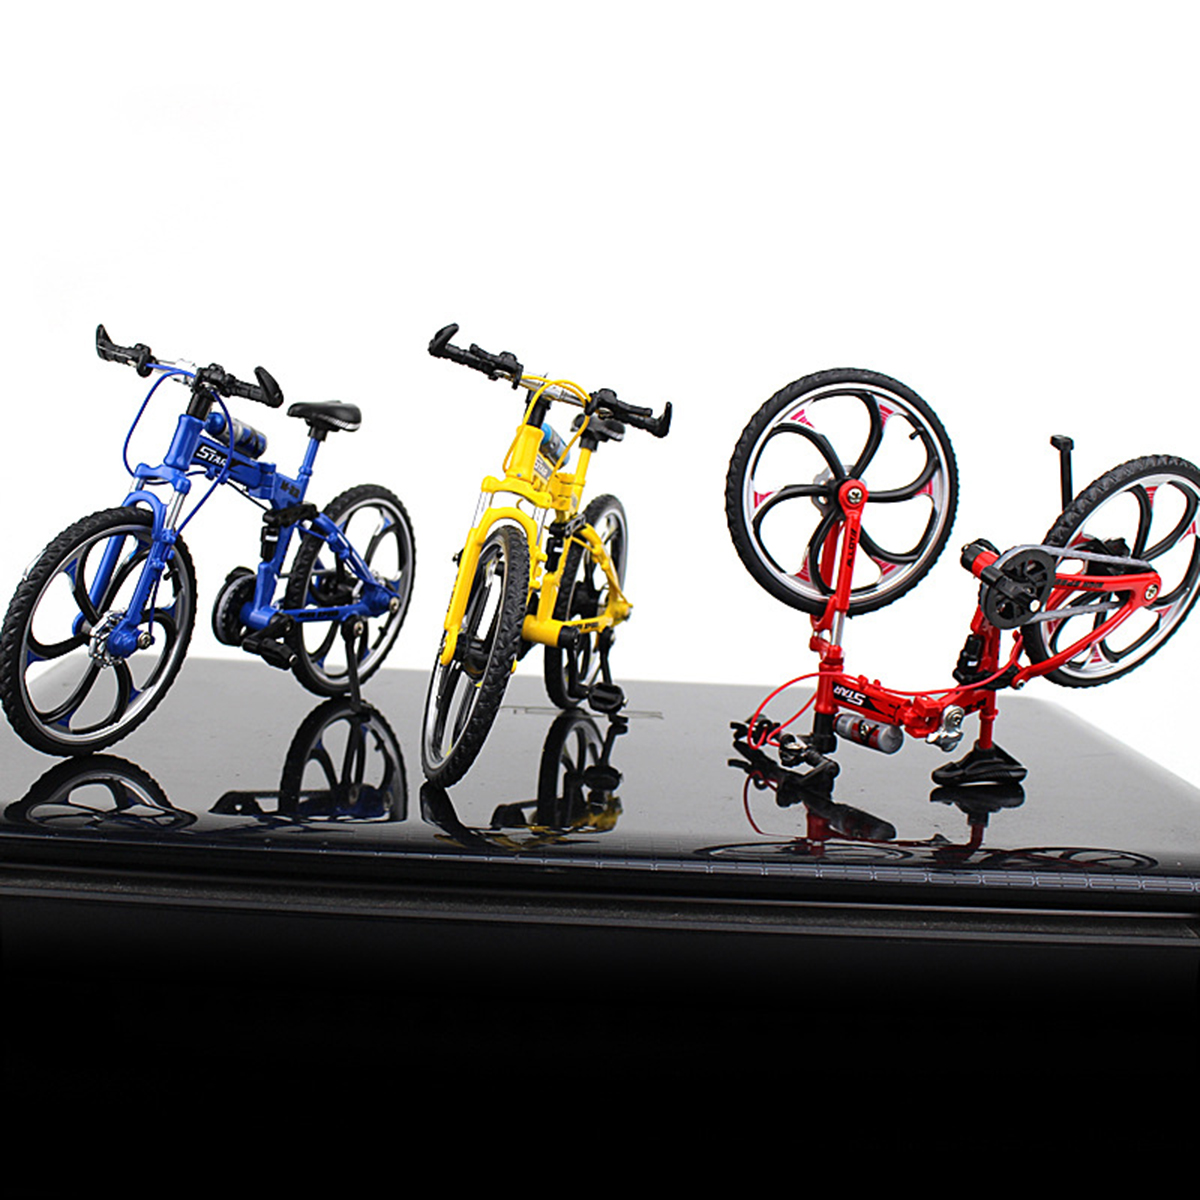 110-3D-Mini-Multi-color-Alloy-Mountain-Racing-Bicycle-Rotatable-Wheel-Diecast-Model-Toy-for-Decorati-1704789-7